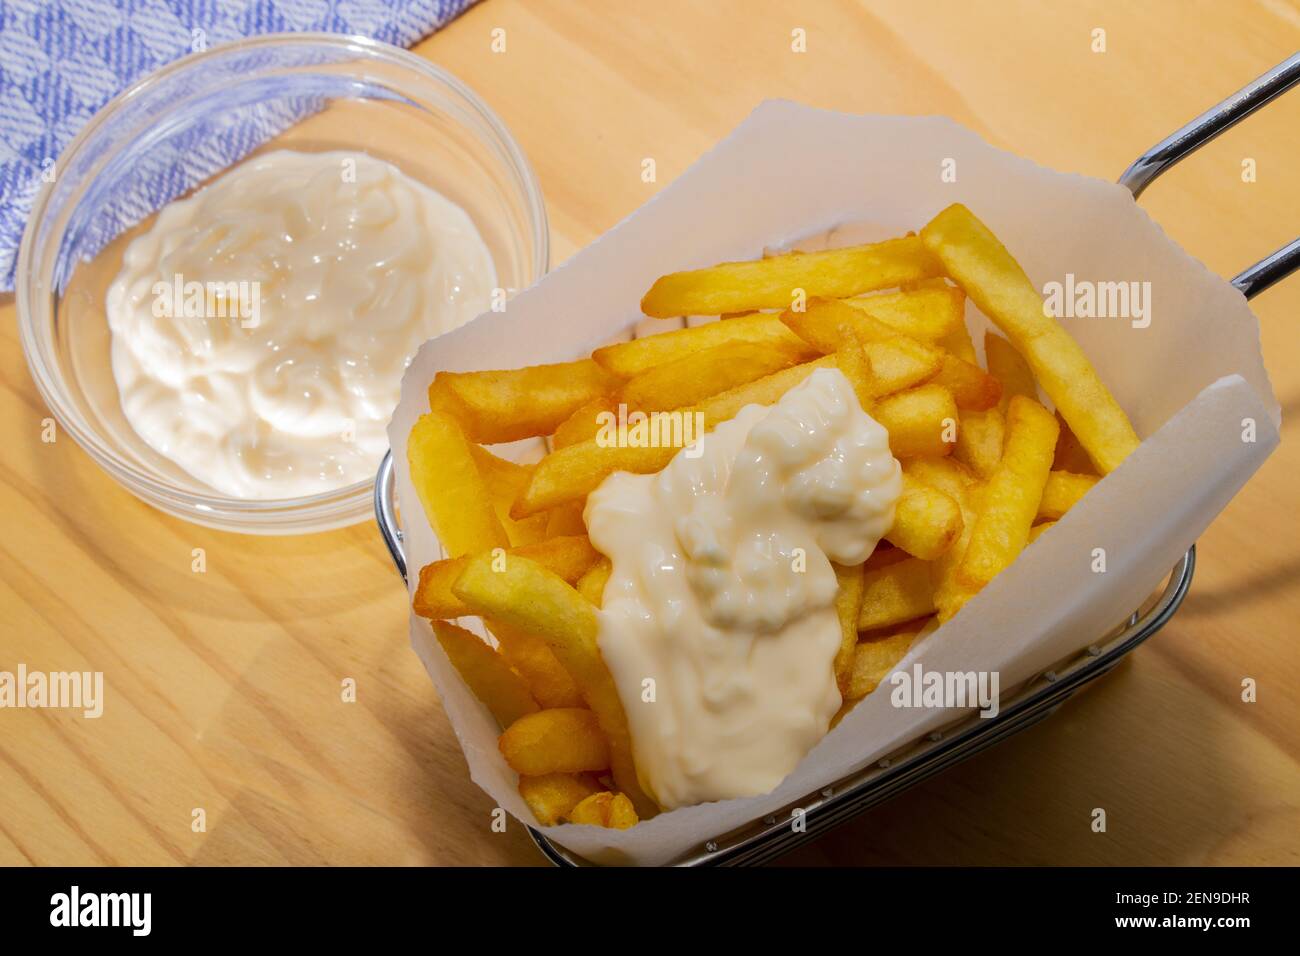 french fries in a metal basket and home made mayonnaise in a glass bowl Stock Photo